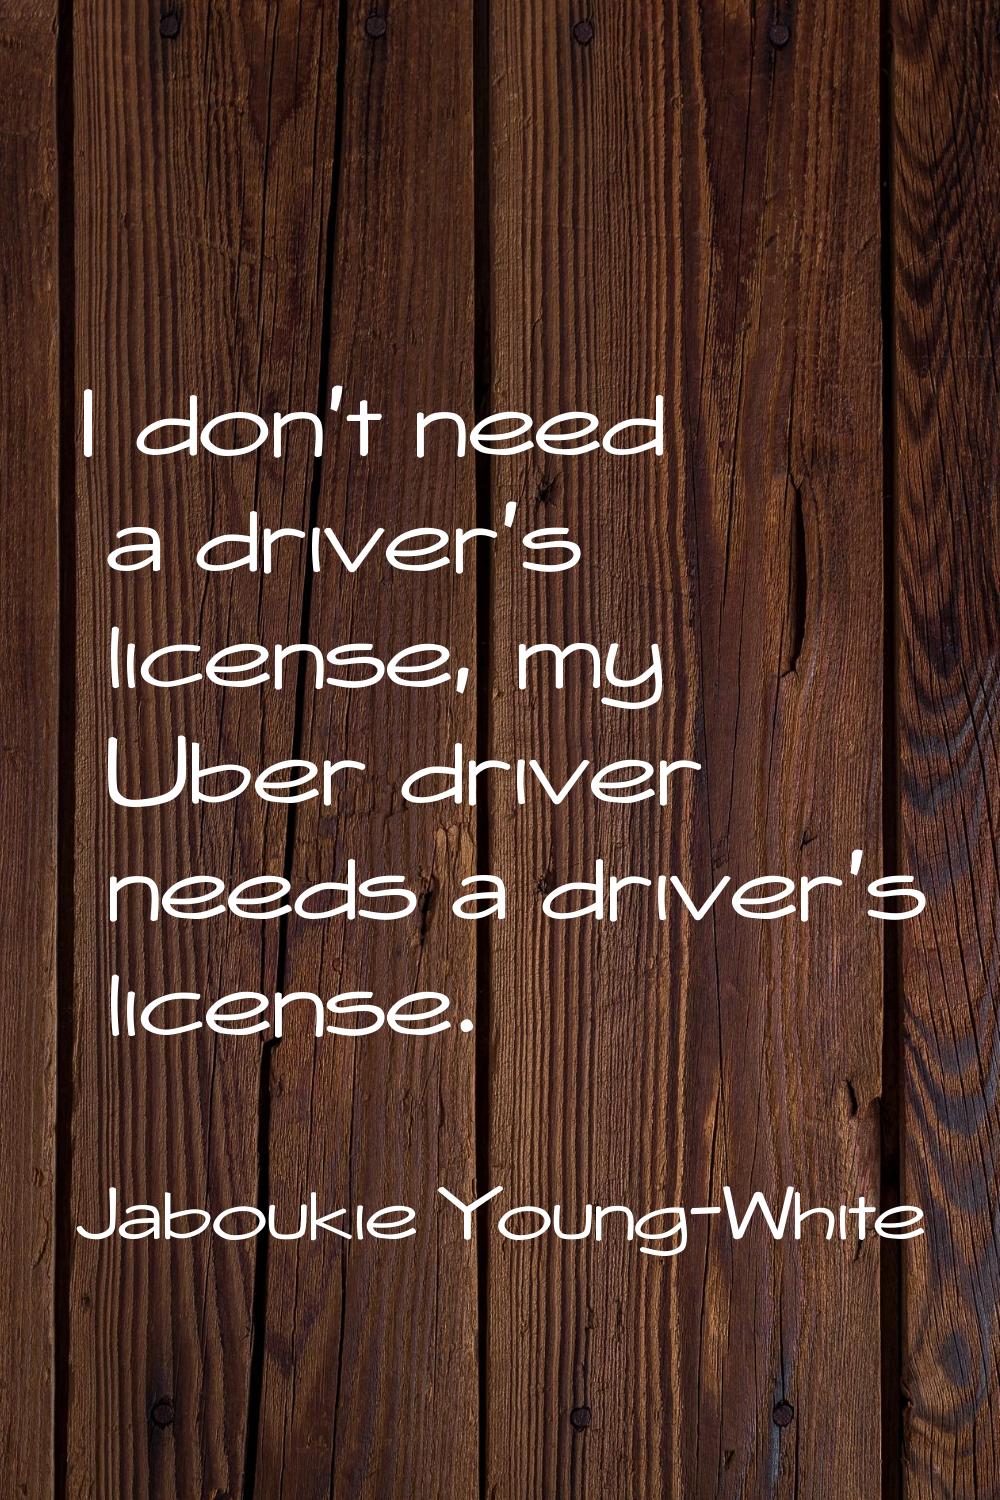 I don't need a driver's license, my Uber driver needs a driver's license.